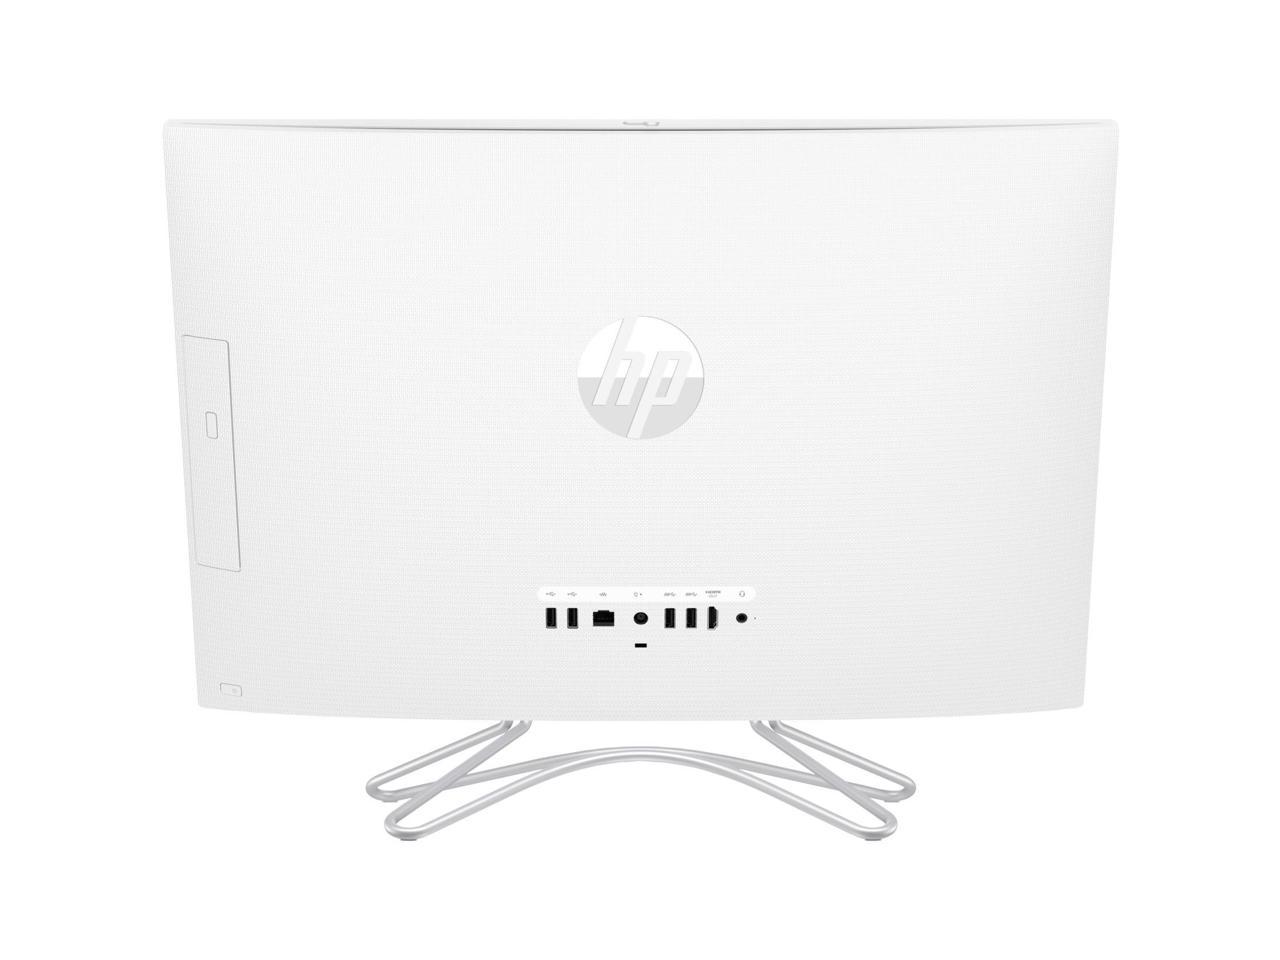 HP All-in-One Computer 24-f0030 A6-Series APU A6-9225 (2.60 GHz) 4 GB DDR4 1 TB HDD 23.8" Touchscreen Windows 10 Home 64-Bit